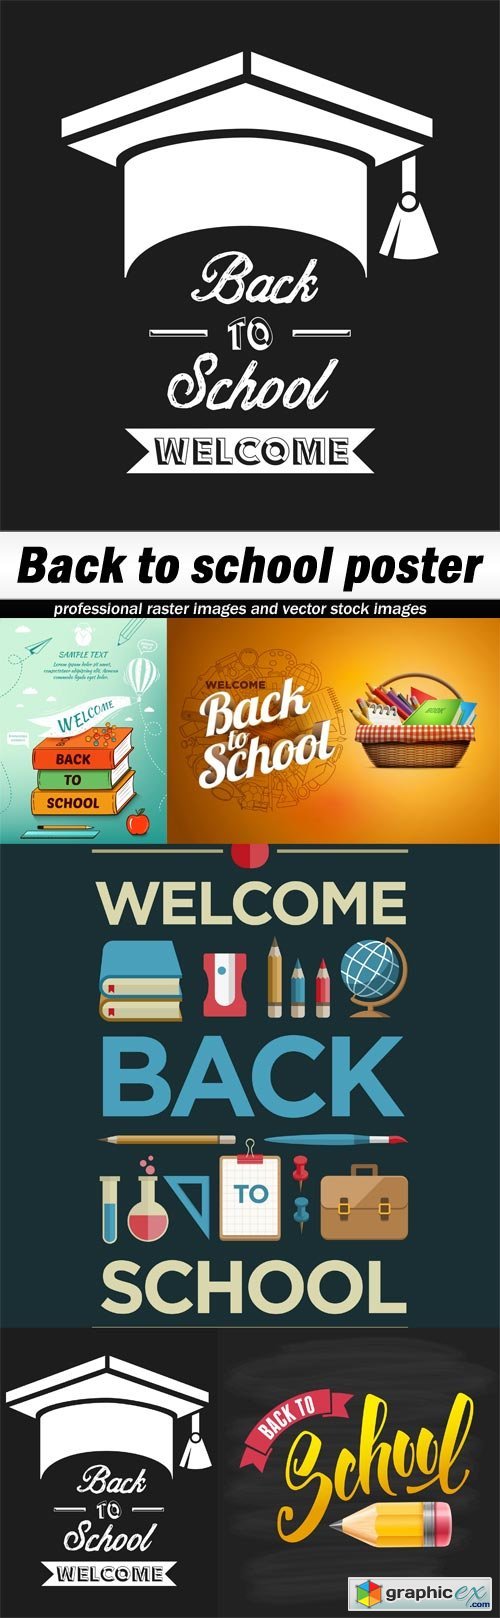 Back to school poster - 5 EPS